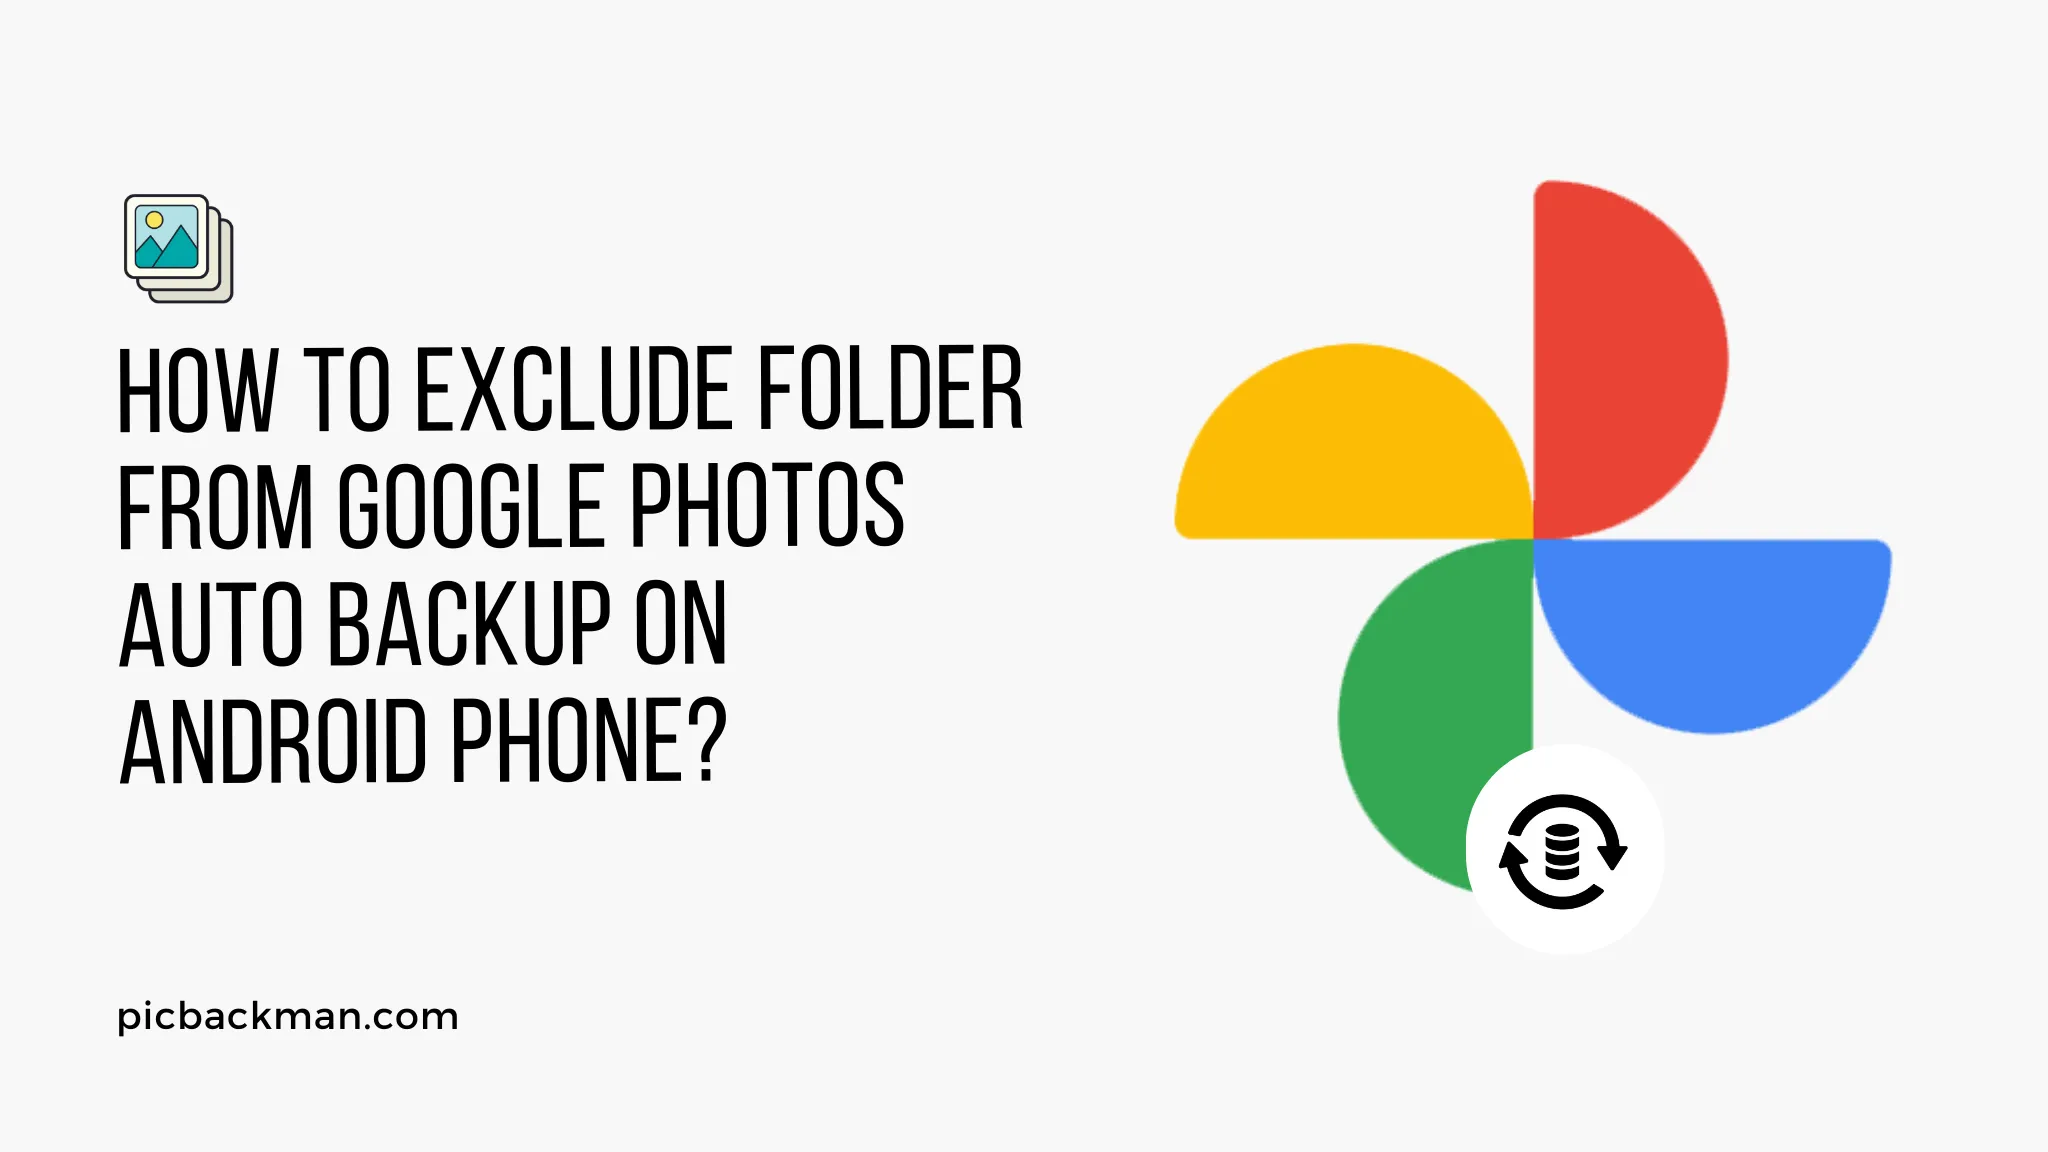 How to Exclude Folder from Google Photos Auto Backup on Android Phone?